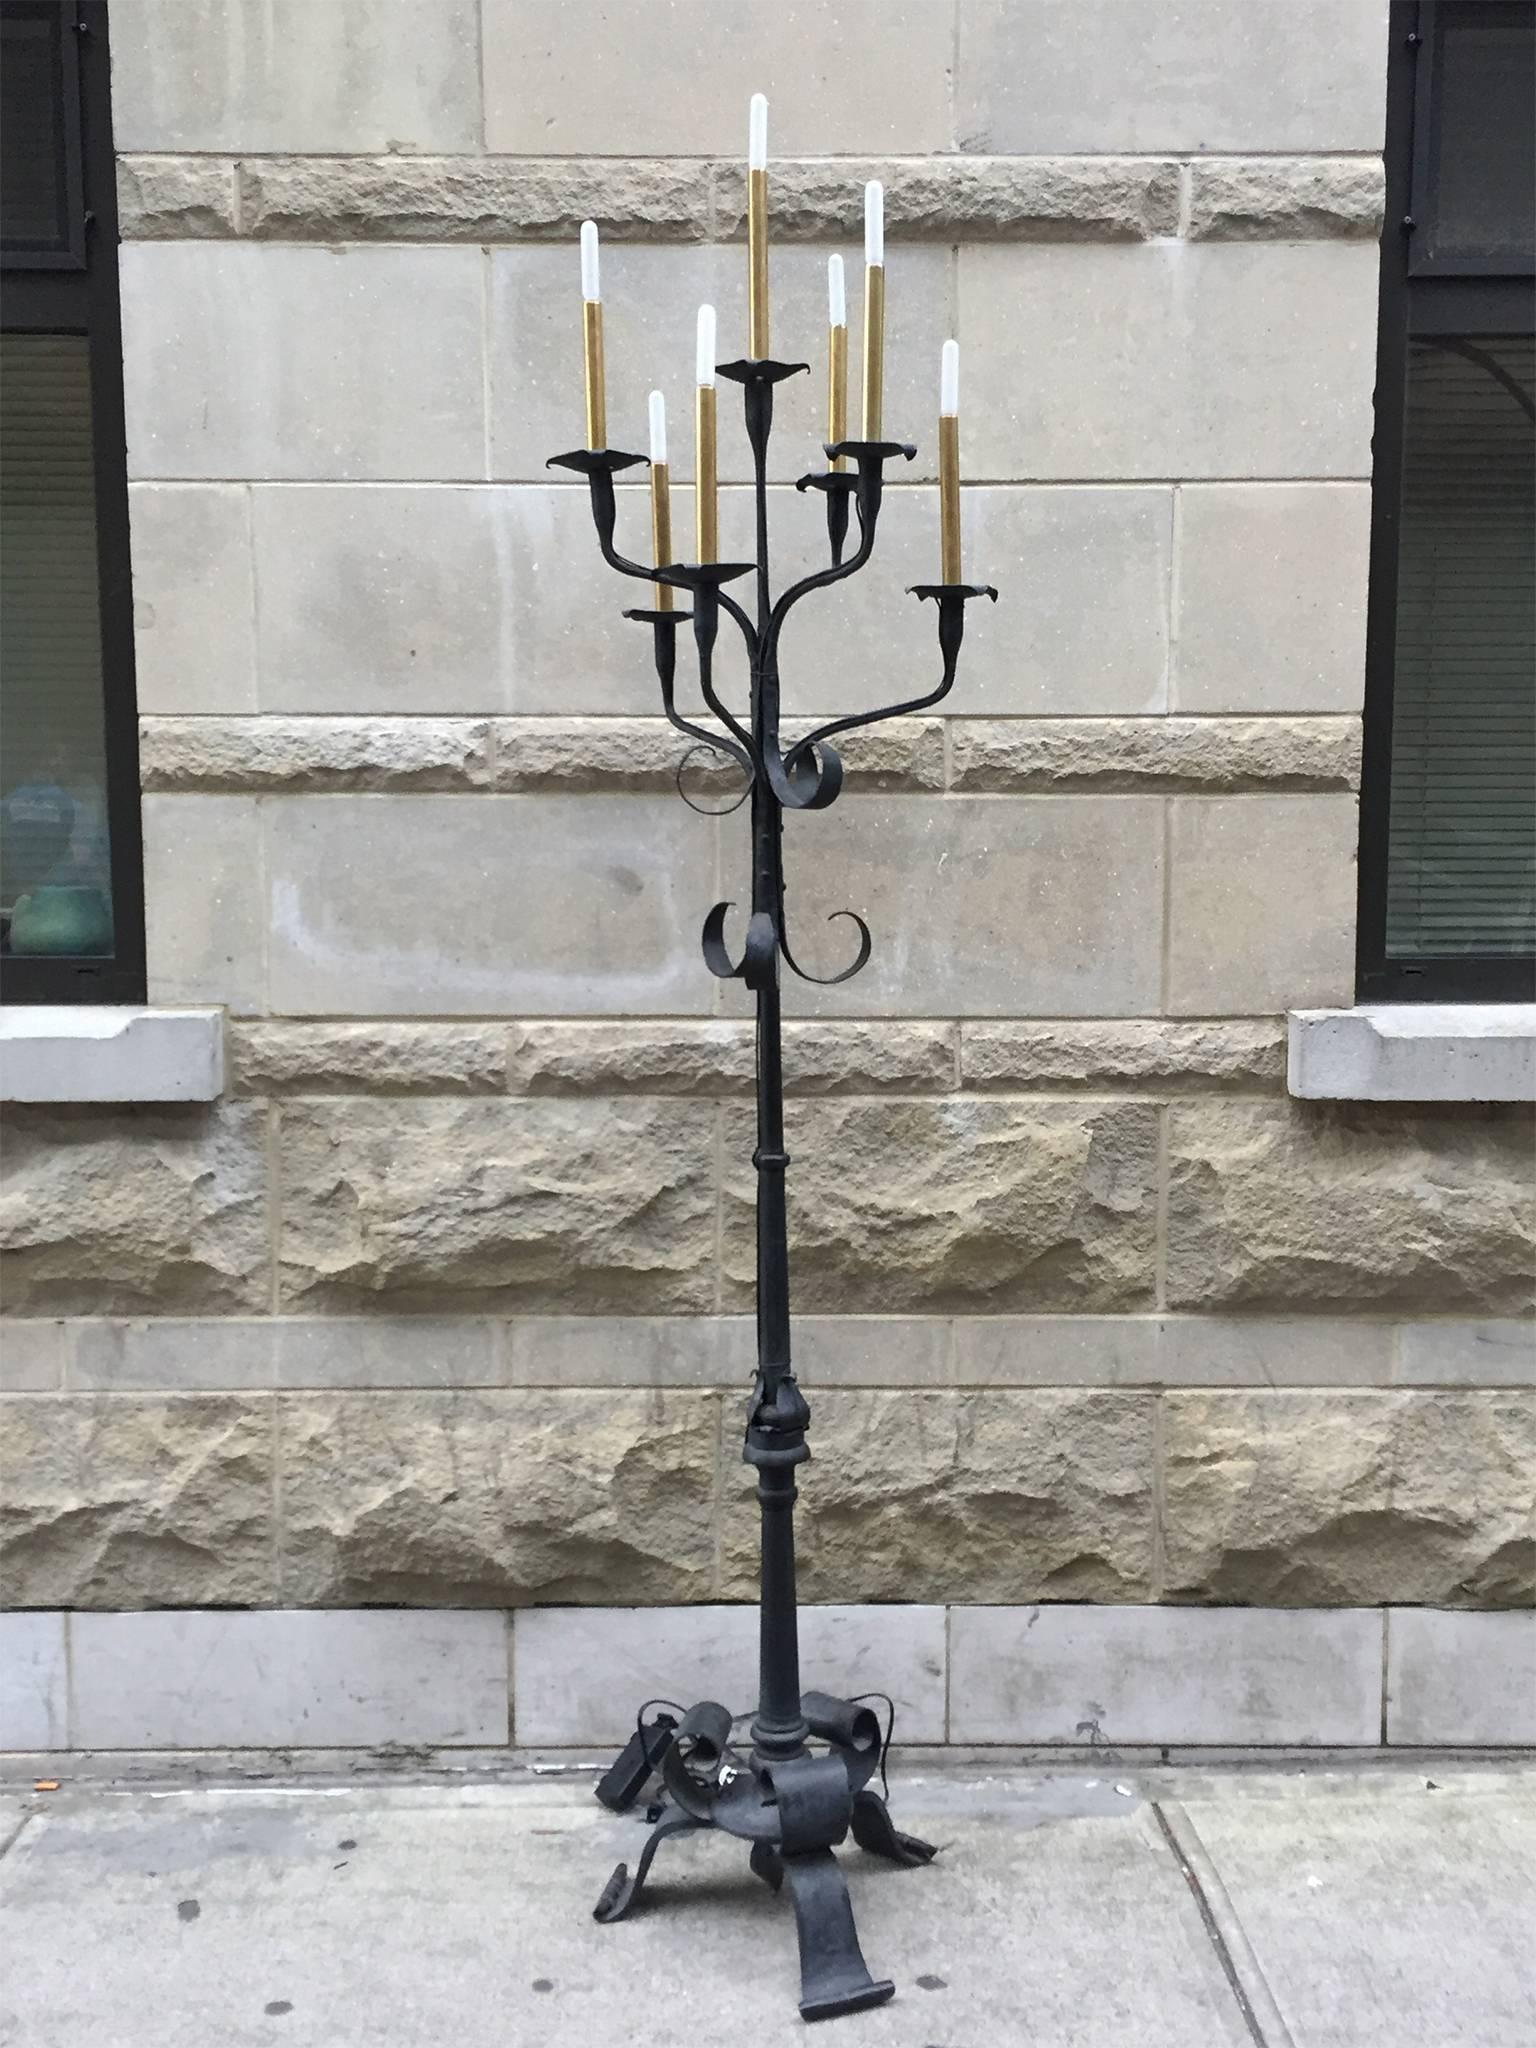 These towering wrought iron torchières were handmade in the 1940s. They have an ebonized coating that lightens the robustness of the iron. Their design is one of whimsy: organic, flat ribbons that end in curlicues. At the top, seven candelabra style